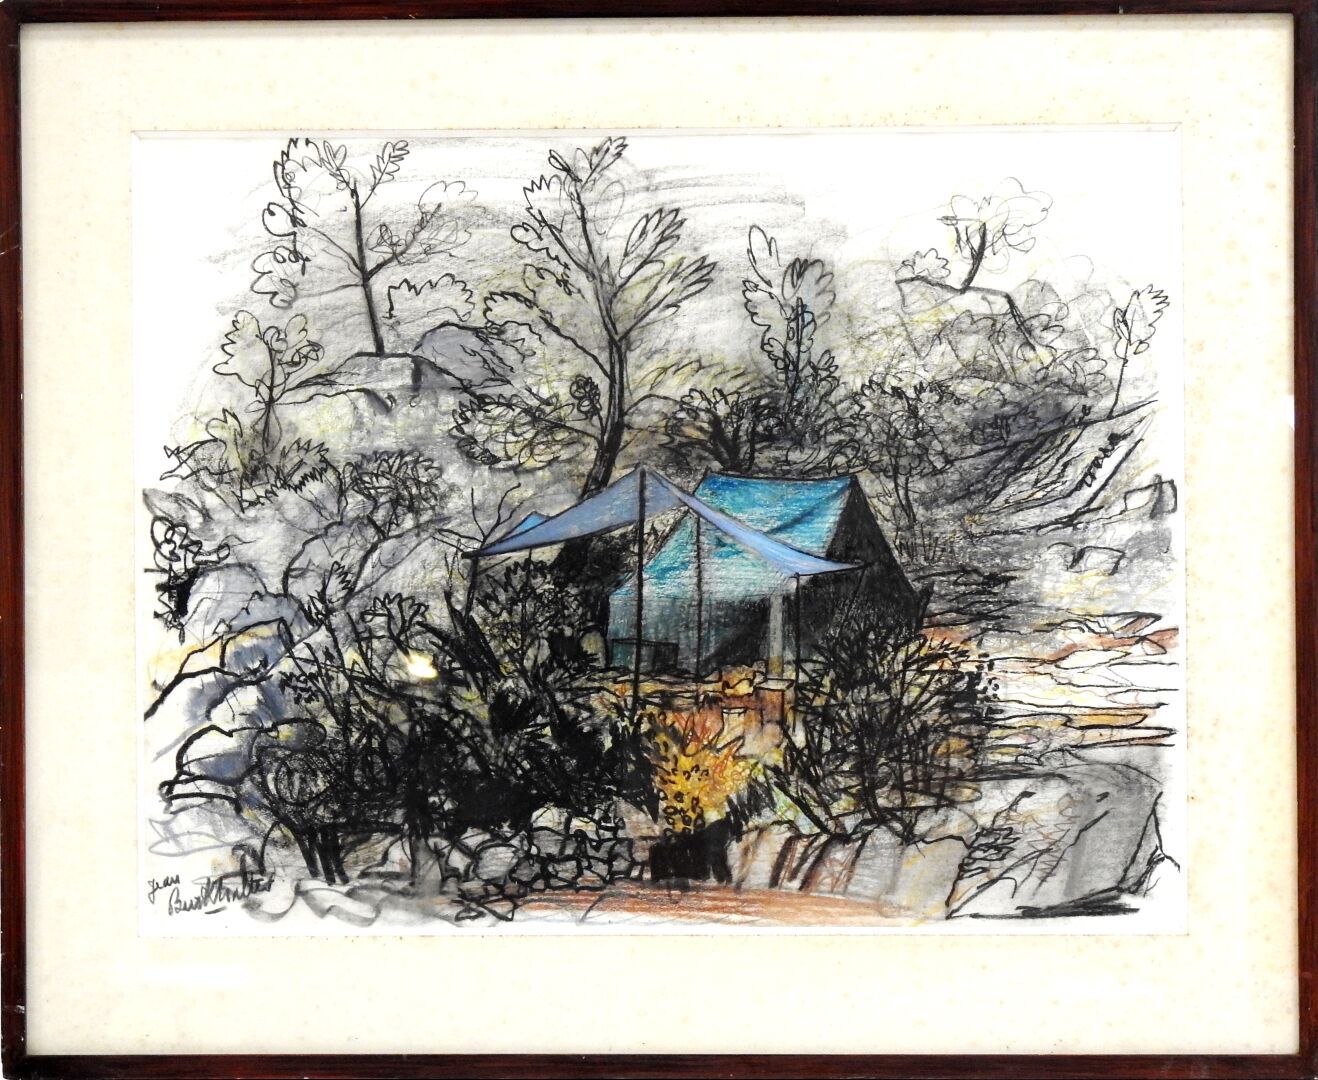 Null Jean BURKHALTER (1895-1982)

Tent in a forest.

Pencil and charcoal on pape&hellip;